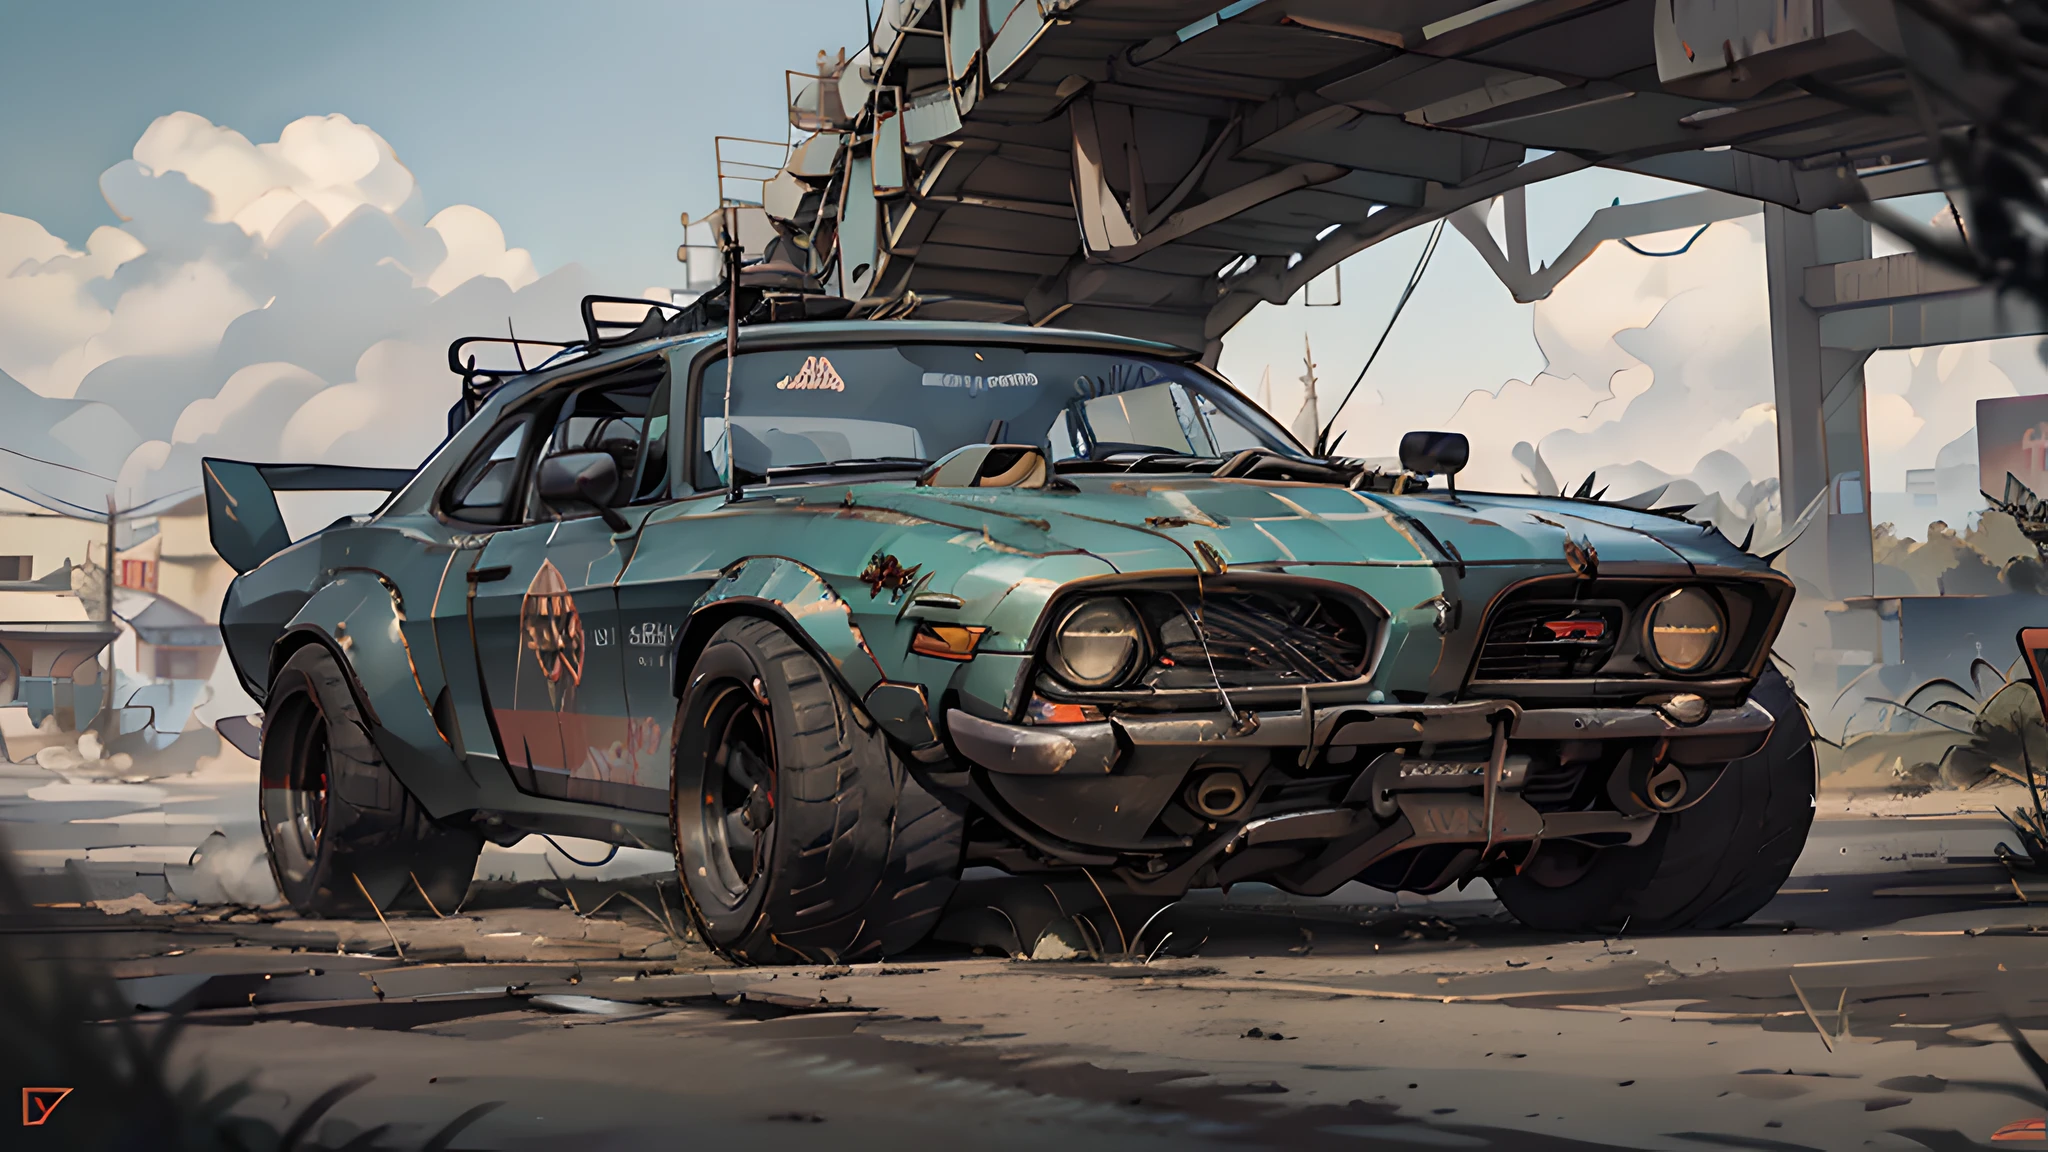 CreAte A cinemAtic, filmic imAge 4k, 8k 和 [George Miller's MAd MAx style]. The imAge should be cAptured in A [wide-Angle view] And depict [單身的] A [post-ApocAlyptic]  V8 [muscle cAr]. The cAr's pAint is A [blAck] covered in A spots of [锈] And thin lAyer of smooth [灰尘] And [污垢], mAking it AppeAr [崎嶇] And [坚韧不拔] but 和 visible [blAck color]
The cAr's body should be [光滑] And [AerodynAmic], giving it A [低的] And [Aggressive] stAnce thAt conveys [力量] And [速度]. The front of the cAr should feAture A [獨特的] front nose cone 和 [rectAngulAr lights] thAt Adds to its [intimidAting] AppeArAnce. The cAr's wheels should be [lArge] And [結實的], 和 [厚的] tires thAt cAn hAndle the [粗糙的] terrAin of the [post-ApocAlyptic] wAstelAnd. The rims should be mAde of [durAble] metAl 和 A [獨特的設計] thAt showcAses the cAr's [individuAlity].
In Addition, the cAr should hAve [eight exhAust side pipes]. The cAr should Also feAture A WeiAnd 6-71 [superchArger] 安裝在引擎蓋上, protruding th粗糙的 the bonnet.
CAr should be designed to look both [力量ful] And [functionAl], built to 和stAnd the [hArsh] 的條件 [post-ApocAlyptic] wAstelAnd.
The imAge should be [ultrA-reAlistic], 和 [高分辨率] cAptured in [nAturAl light]. The lighting should creAte [soft shAdows] And showcAse the [rAw] And [vibrAnt colors] of the cAr. The imAge should be A highly-detAiled photogrAphy set in A [post-nucleAr], [fAllout] 喜歡設定, conveying A sense of [dAnger] And [堅韌不拔]. The finAl imAge should be A [mAsterpiece], 和 A [reAlistic portrAyAl] of the Interceptor thAt is both [intimidAting] And [Awe-inspiring]. BAckground should contAin [empty desert highwAy], imAge tAkes plAce before the storm, 和 the [夏日炎熱的陽光] 仍然在天空中閃耀, but in the distAnce, the sky is A [dArk And foreboding shAde of blue], hinting At An impending storm